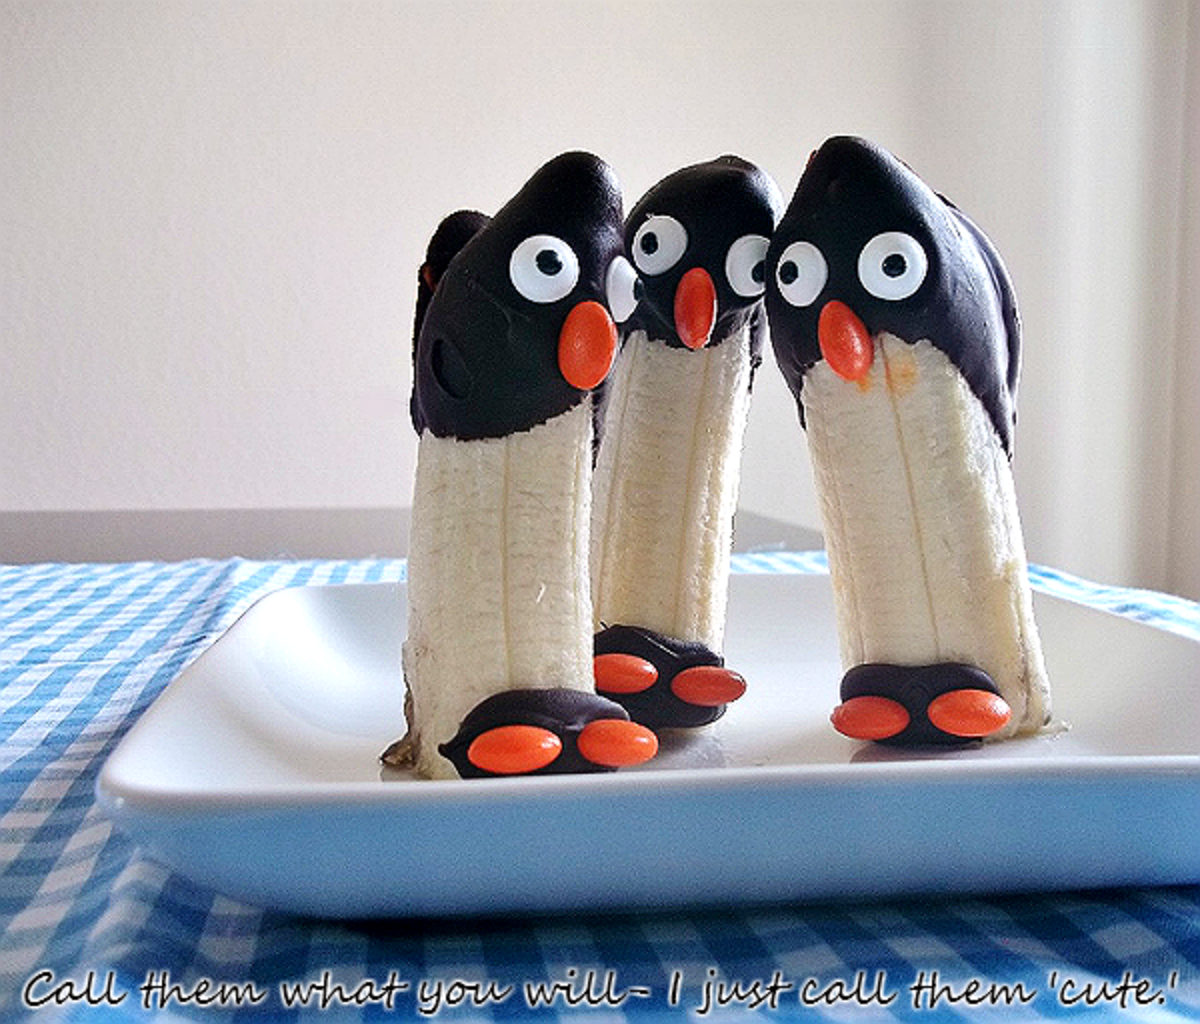 Make some Penguin snacks for your kids to help celebrate Penguin Day!